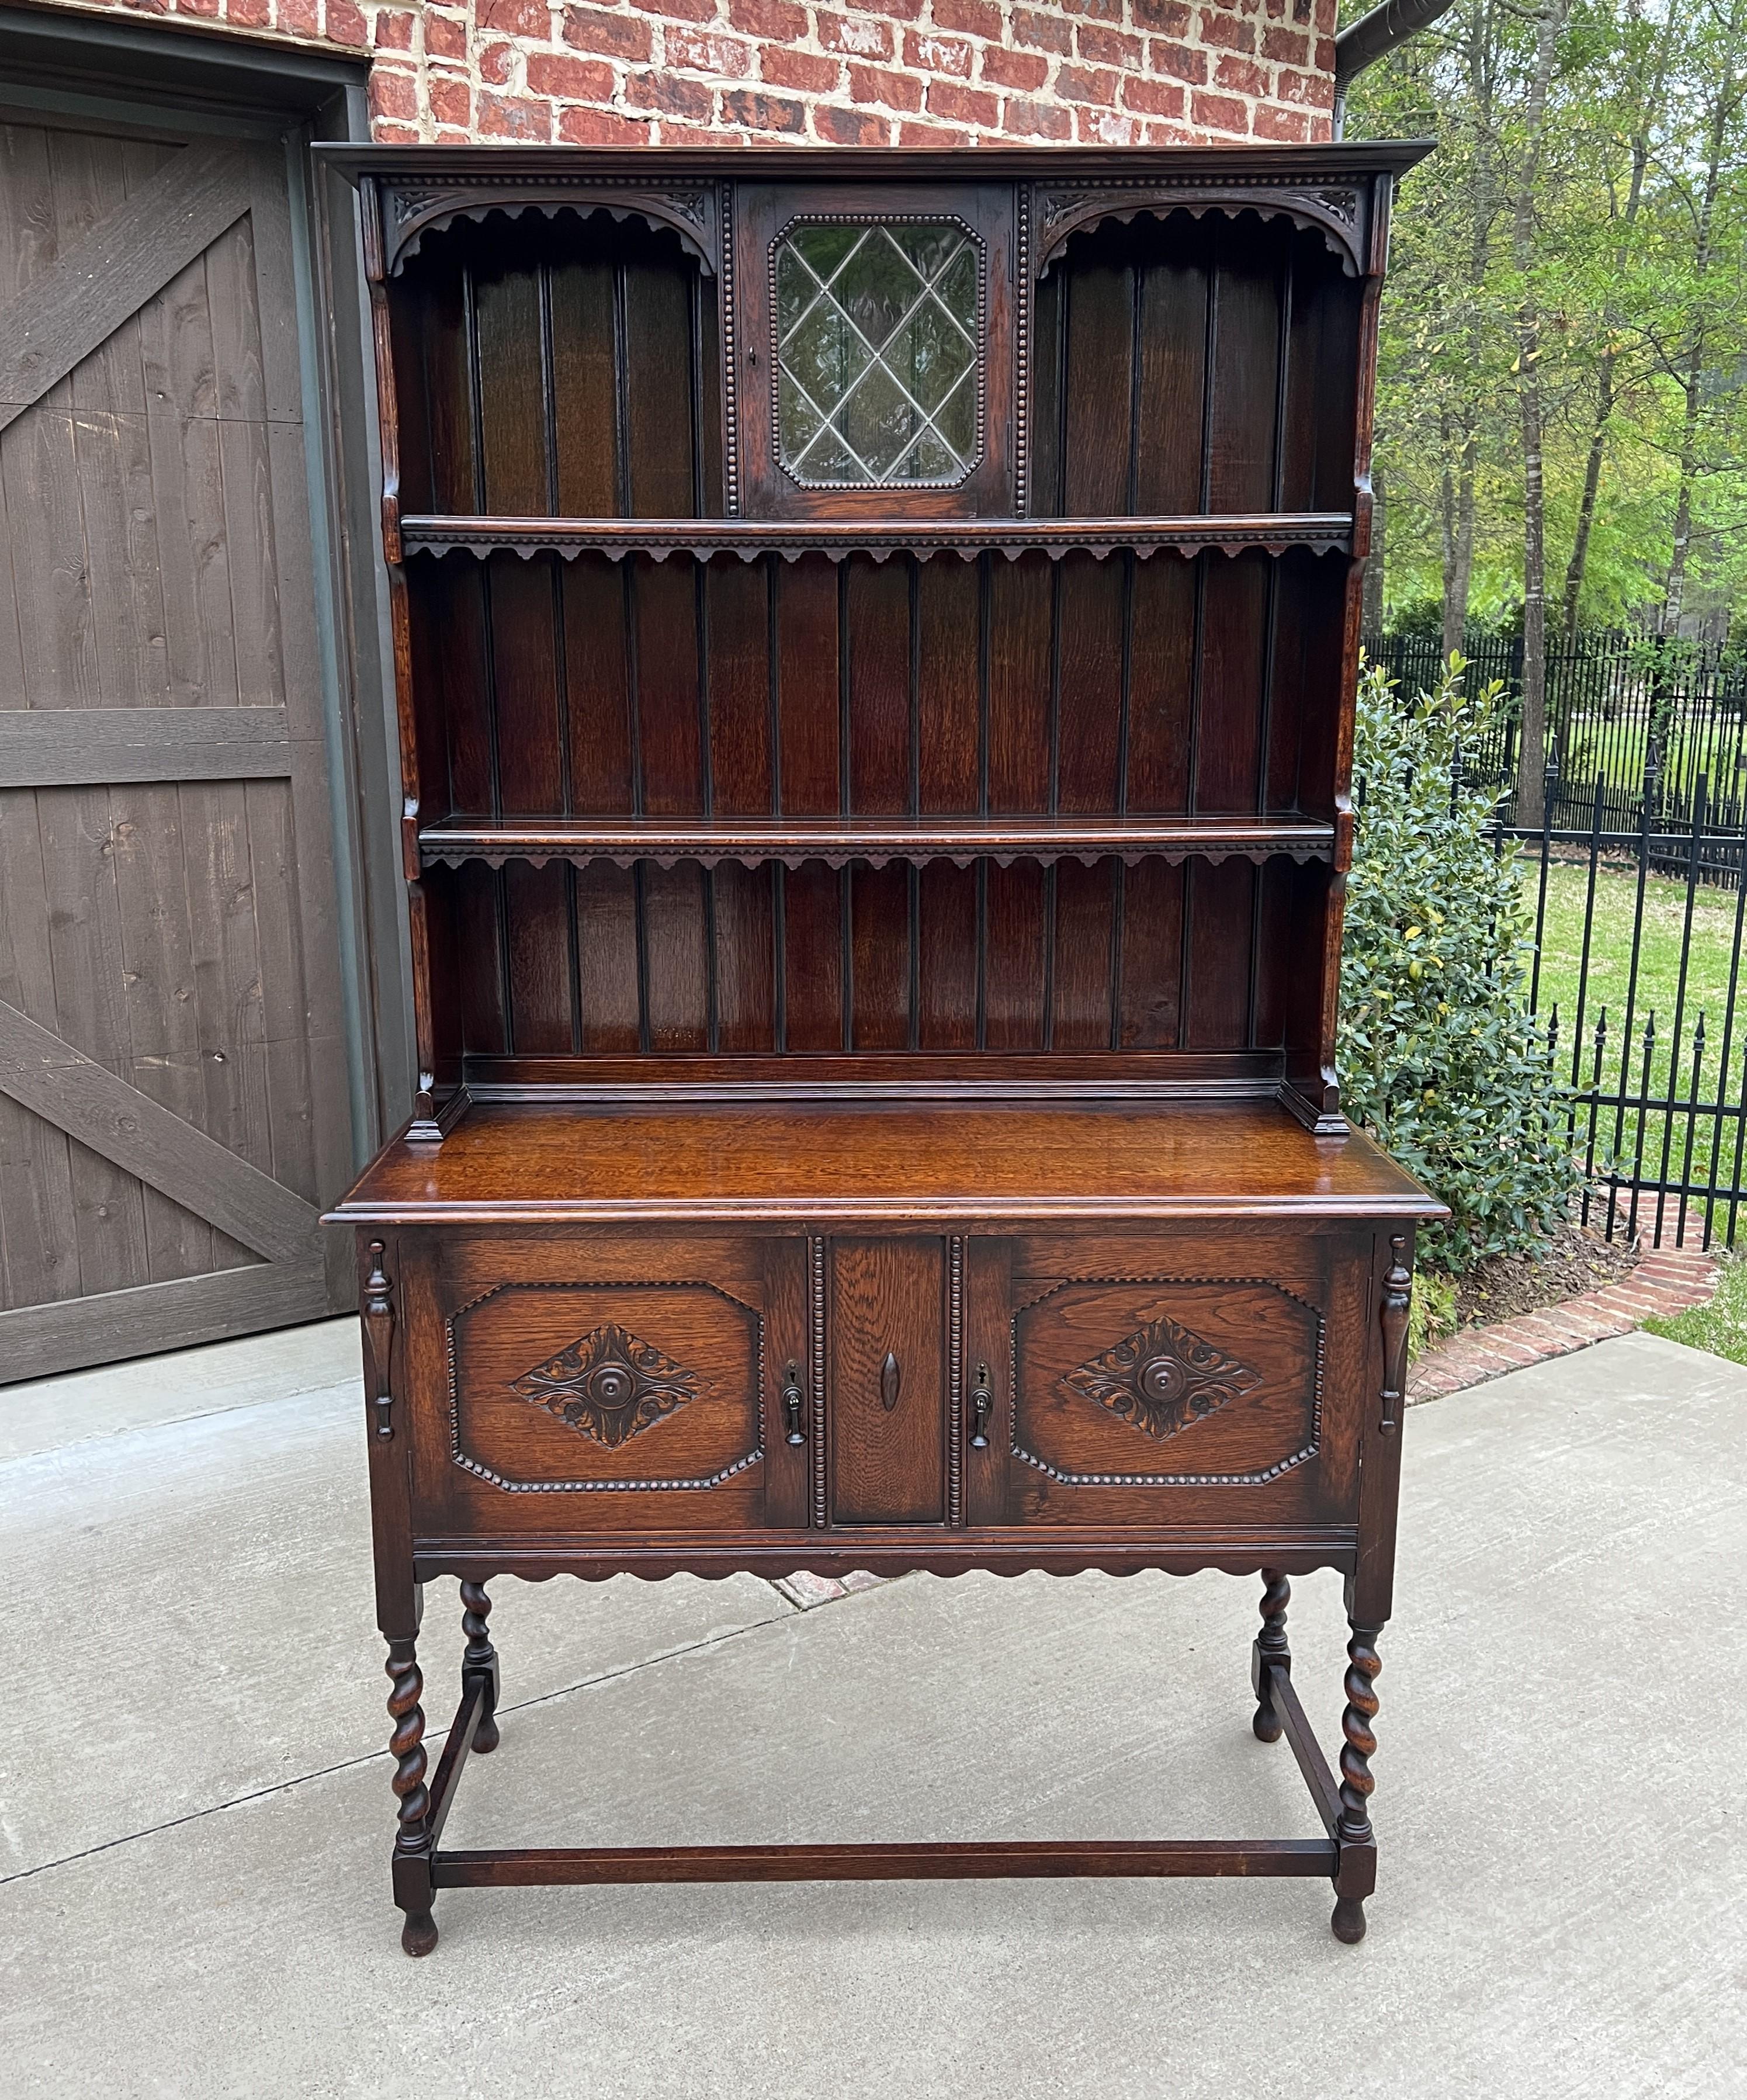 CHARMING Antique English Oak Jacobean Barley Twist Plate Dresser, Sideboard, Hutch Cabinet, Server or Buffet circa 1920s

 These pieces, commonly known as 